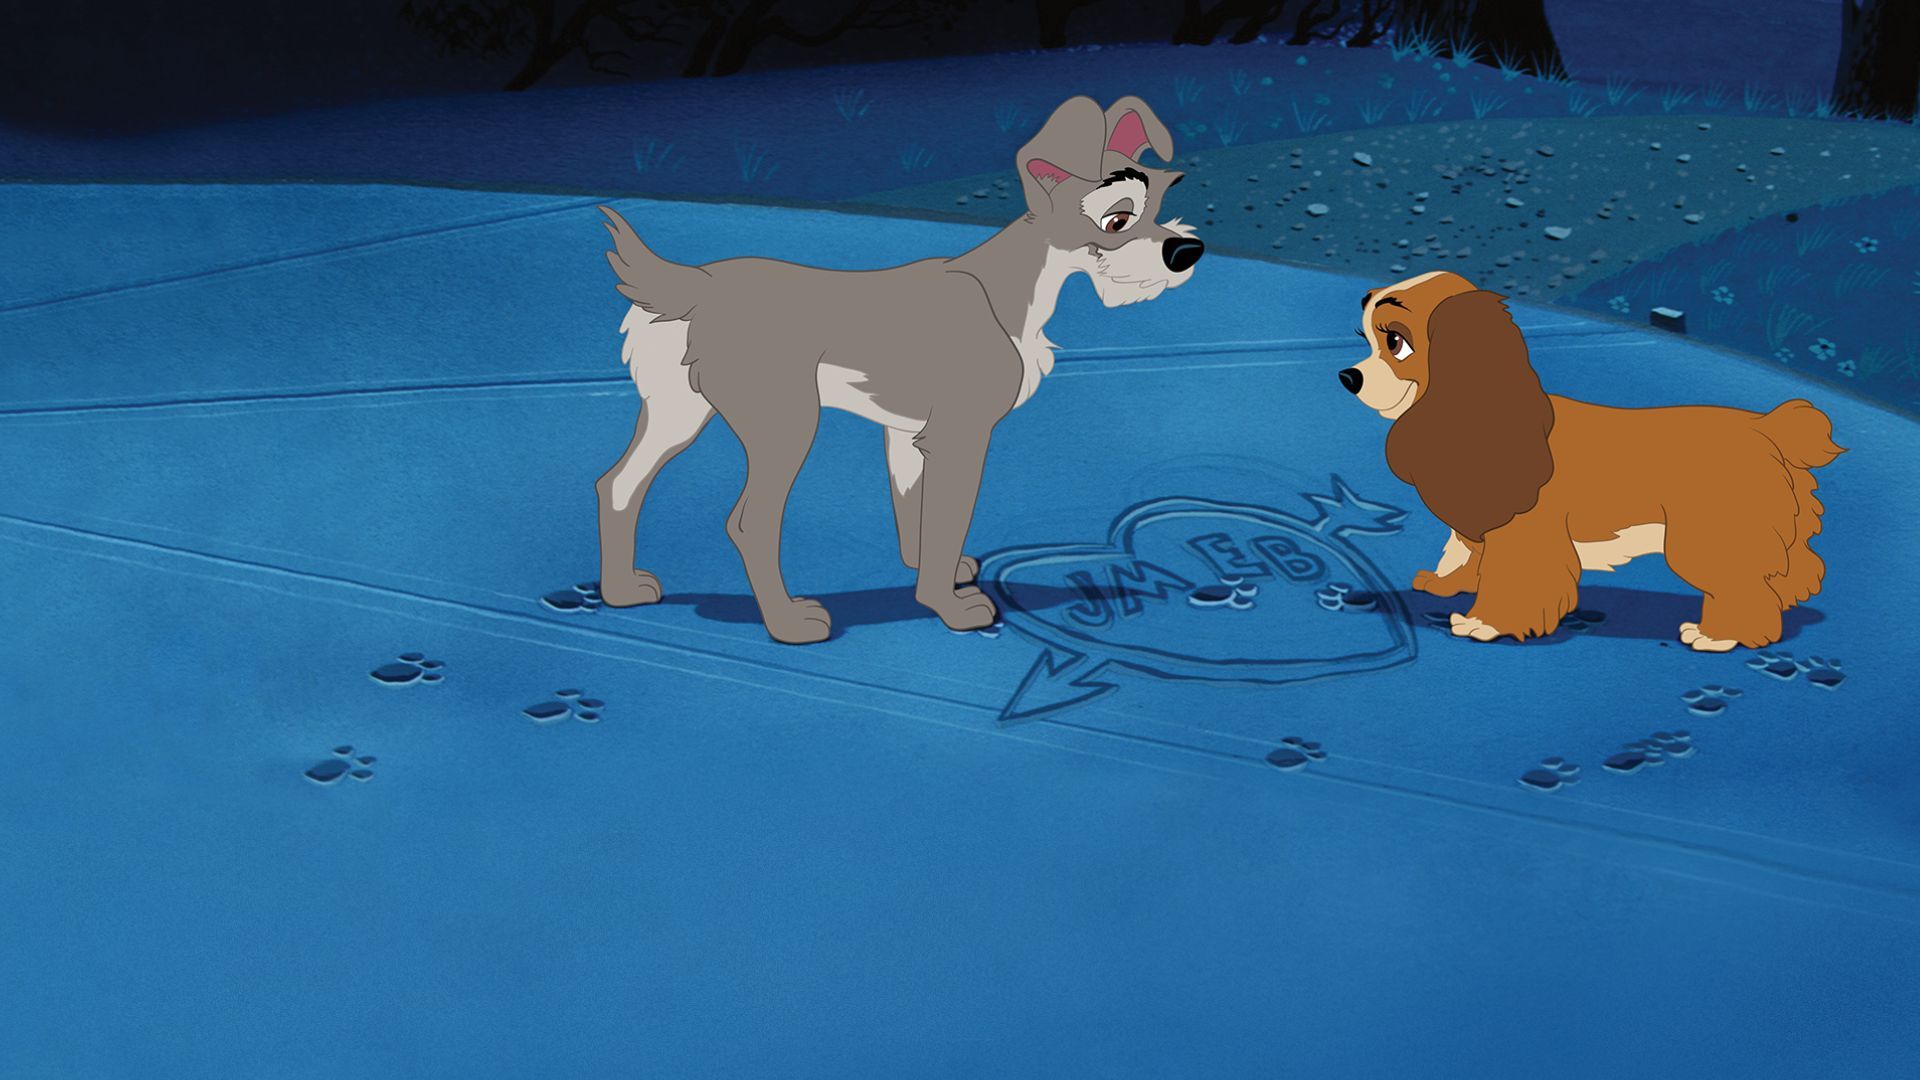 The Lady And The Tramp Wallpapers Wallpaper Cave